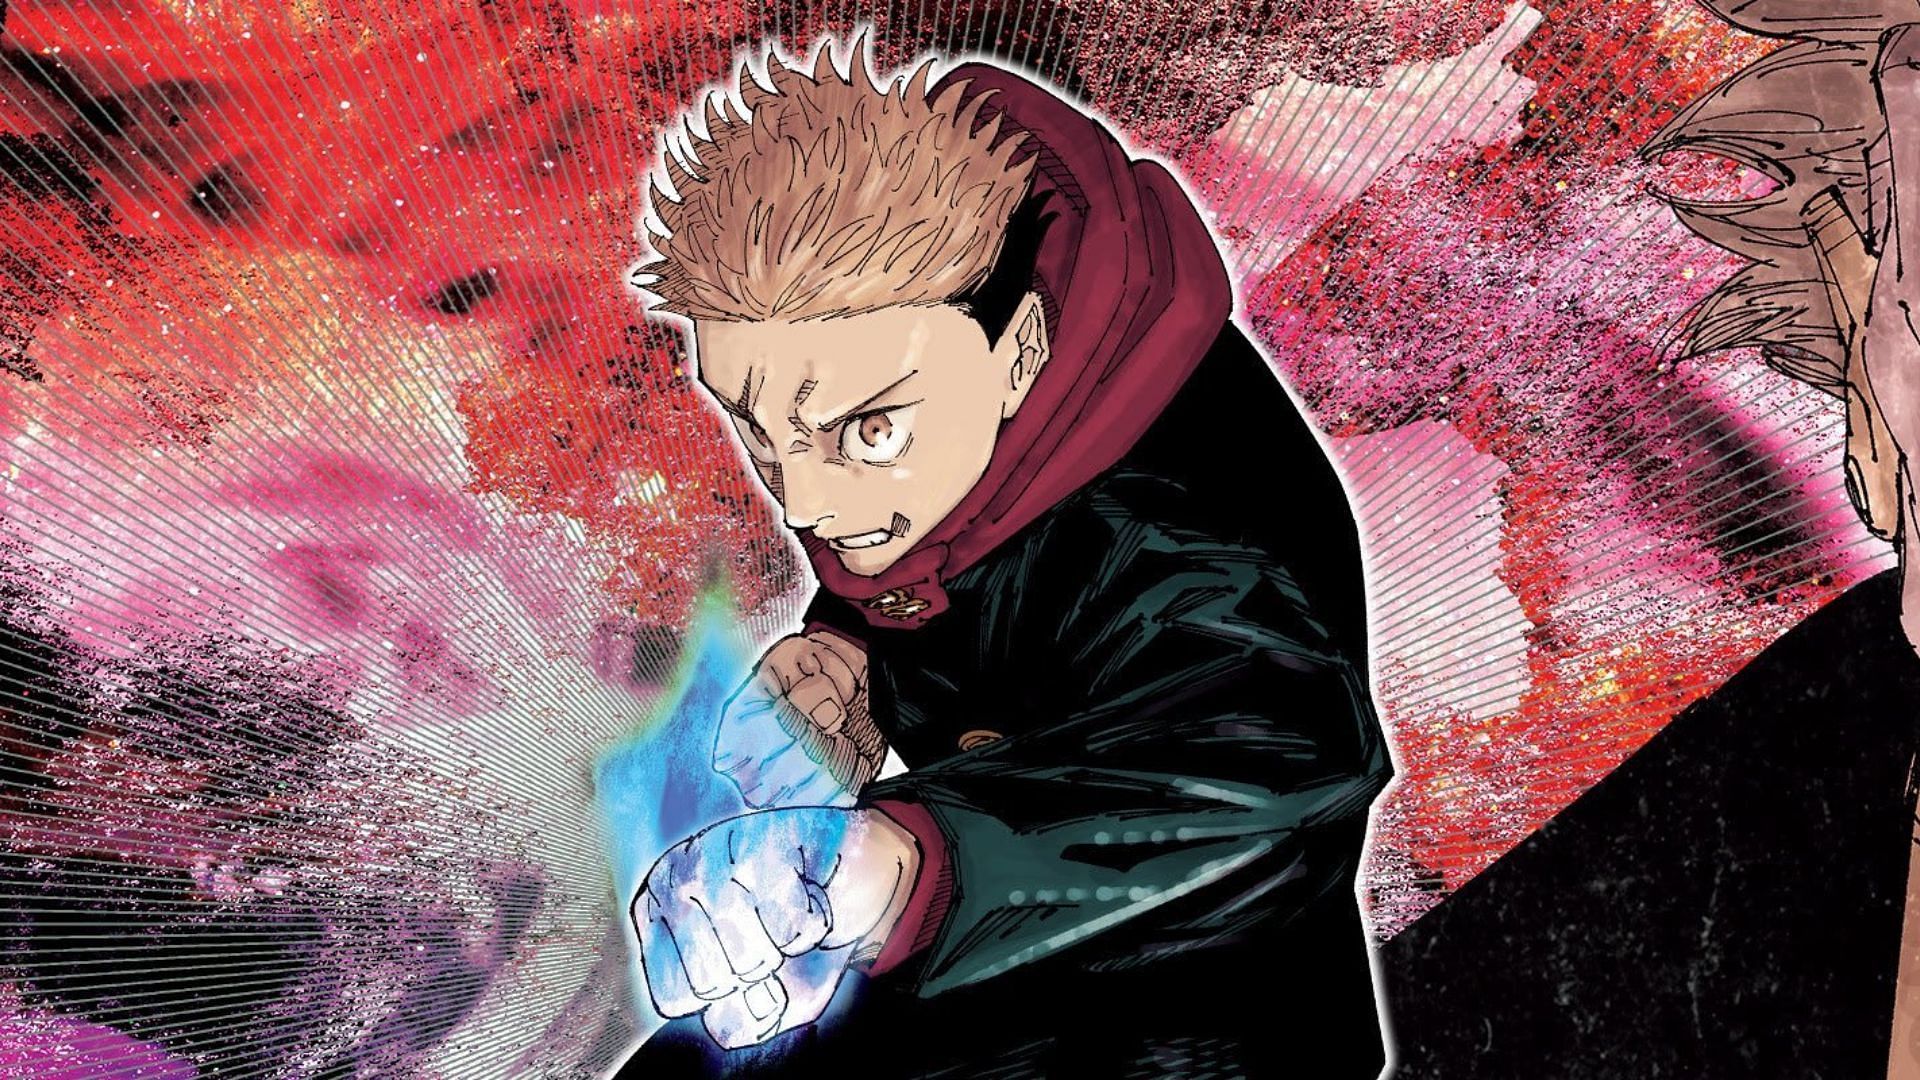 Jujutsu Kaisen chapter 241 all but confirmed to reveal Yuji